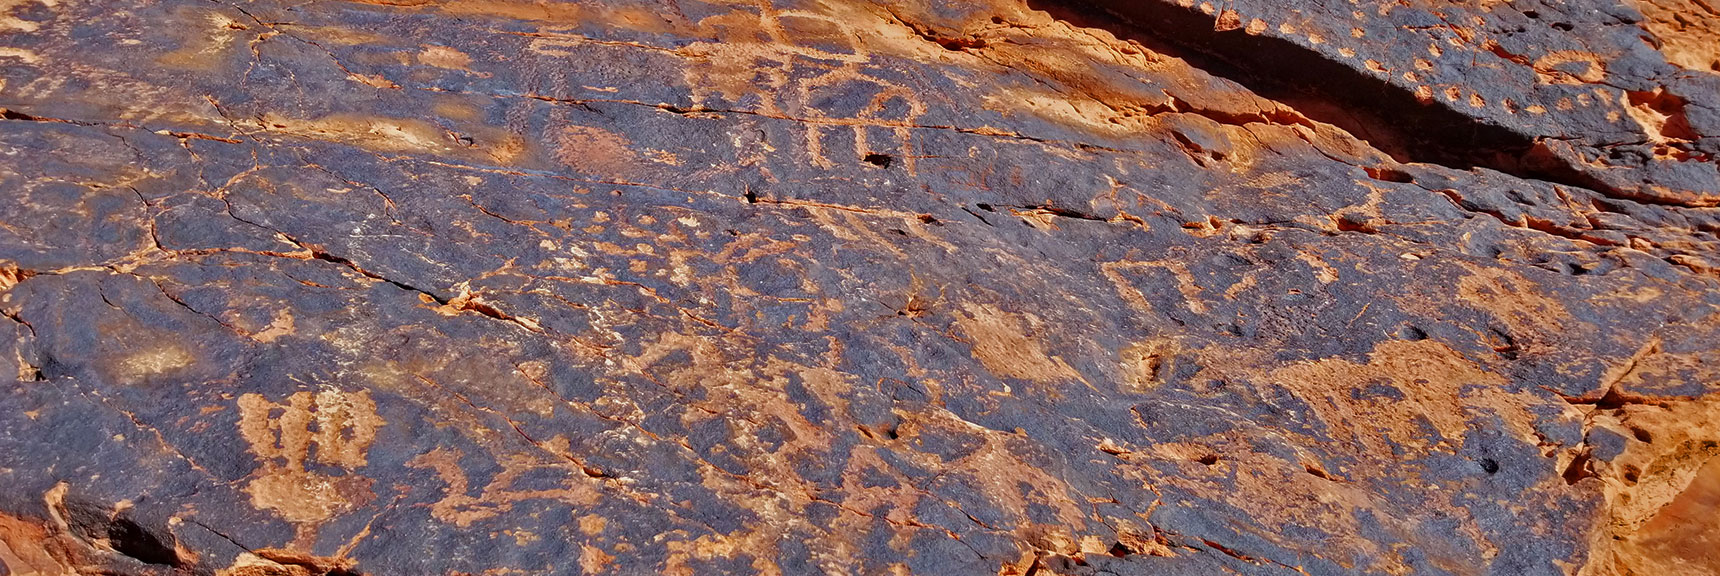 Petroglyphs on Mouse's Tank Trail in Valley of Fire State Park, Nevada, Slide 5